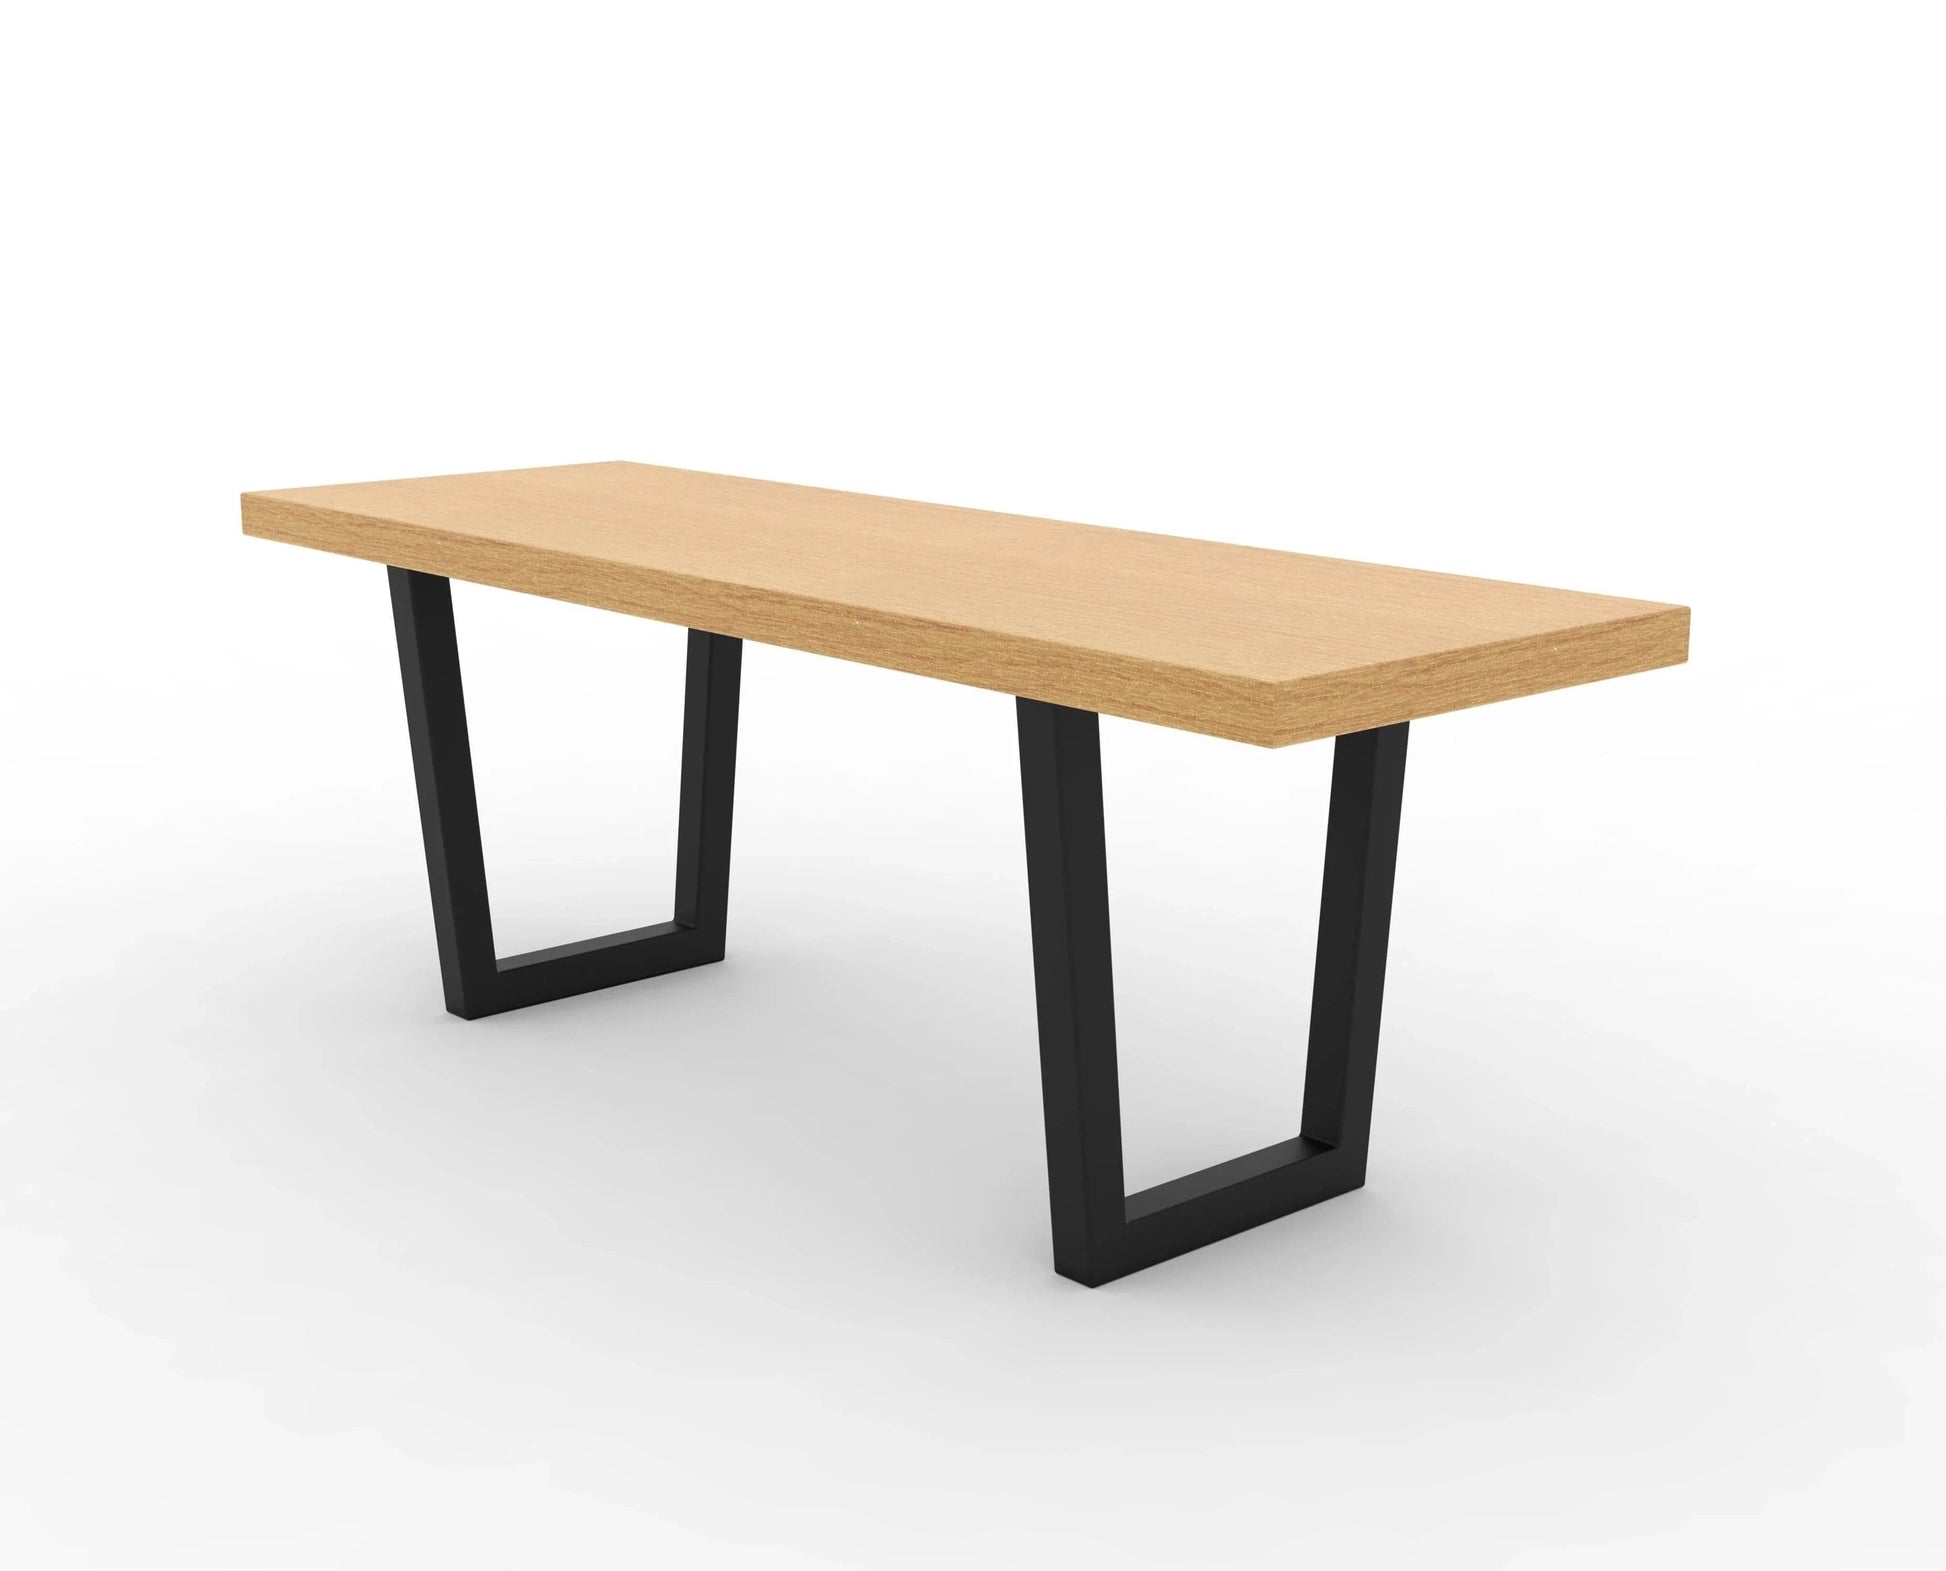 The Carpentry Shop Co. Modern Bench with Metal Legs